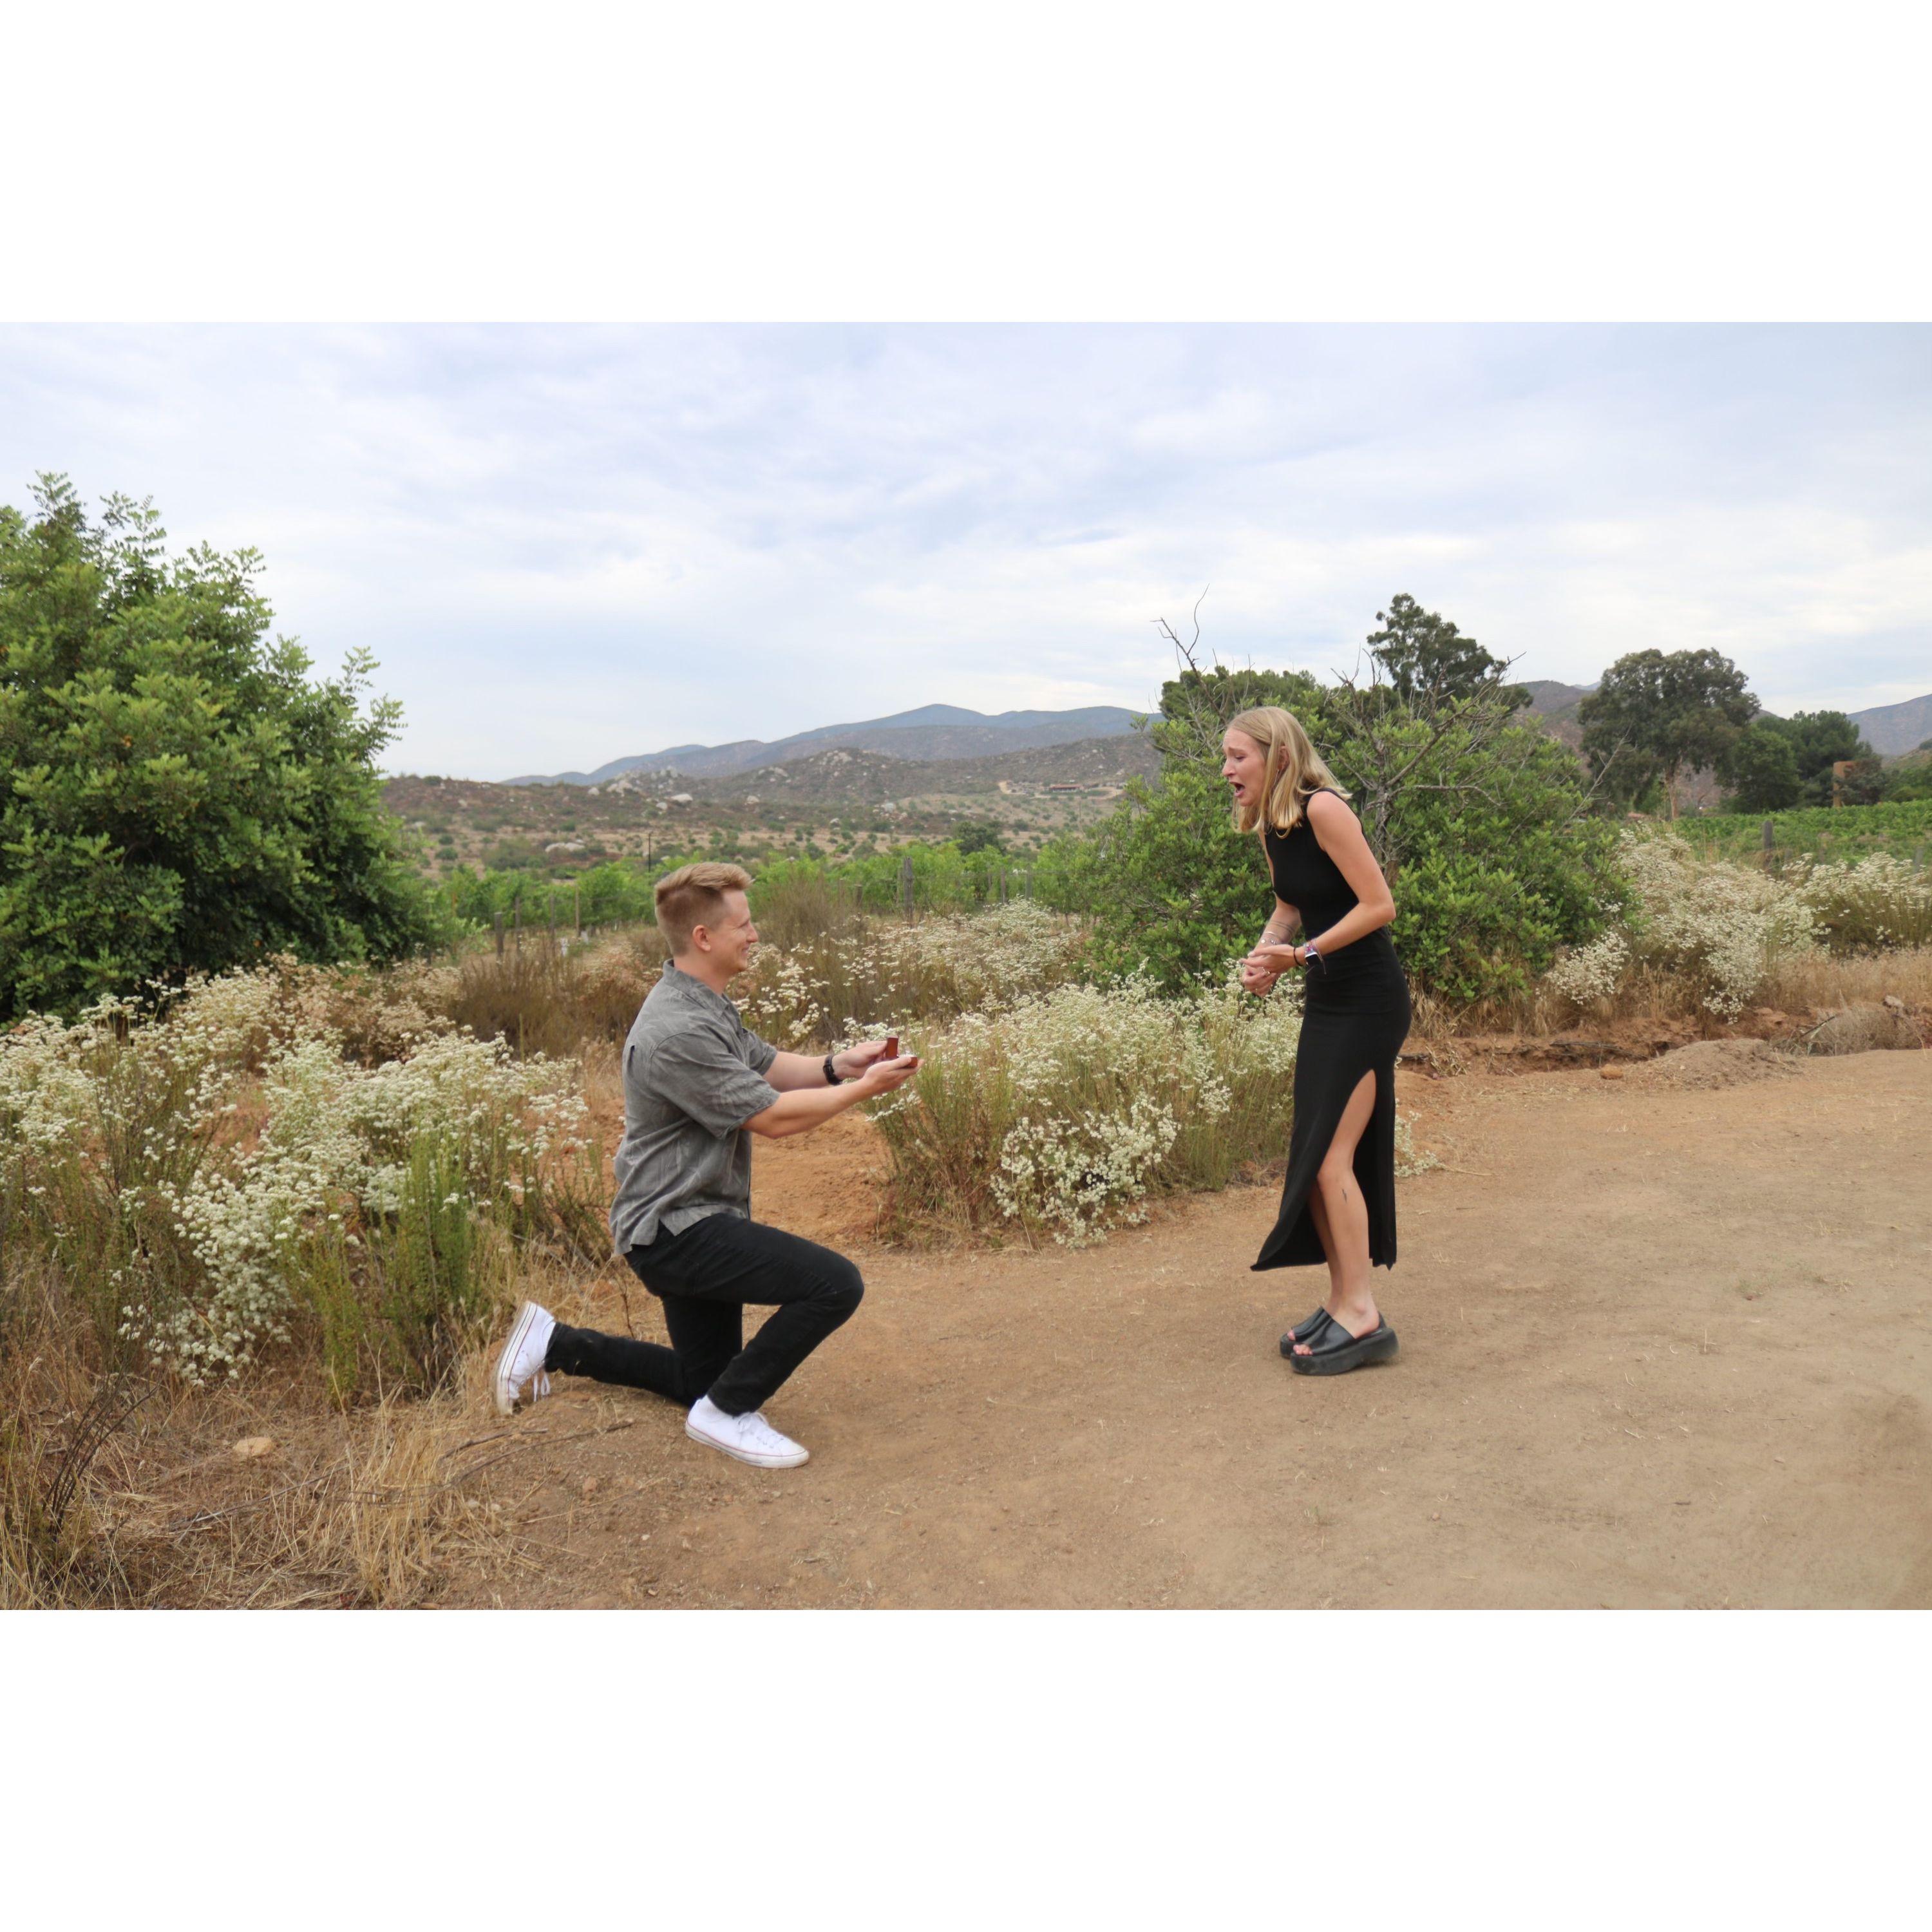 2023 Date of Proposal | I think Ryley's face says it all